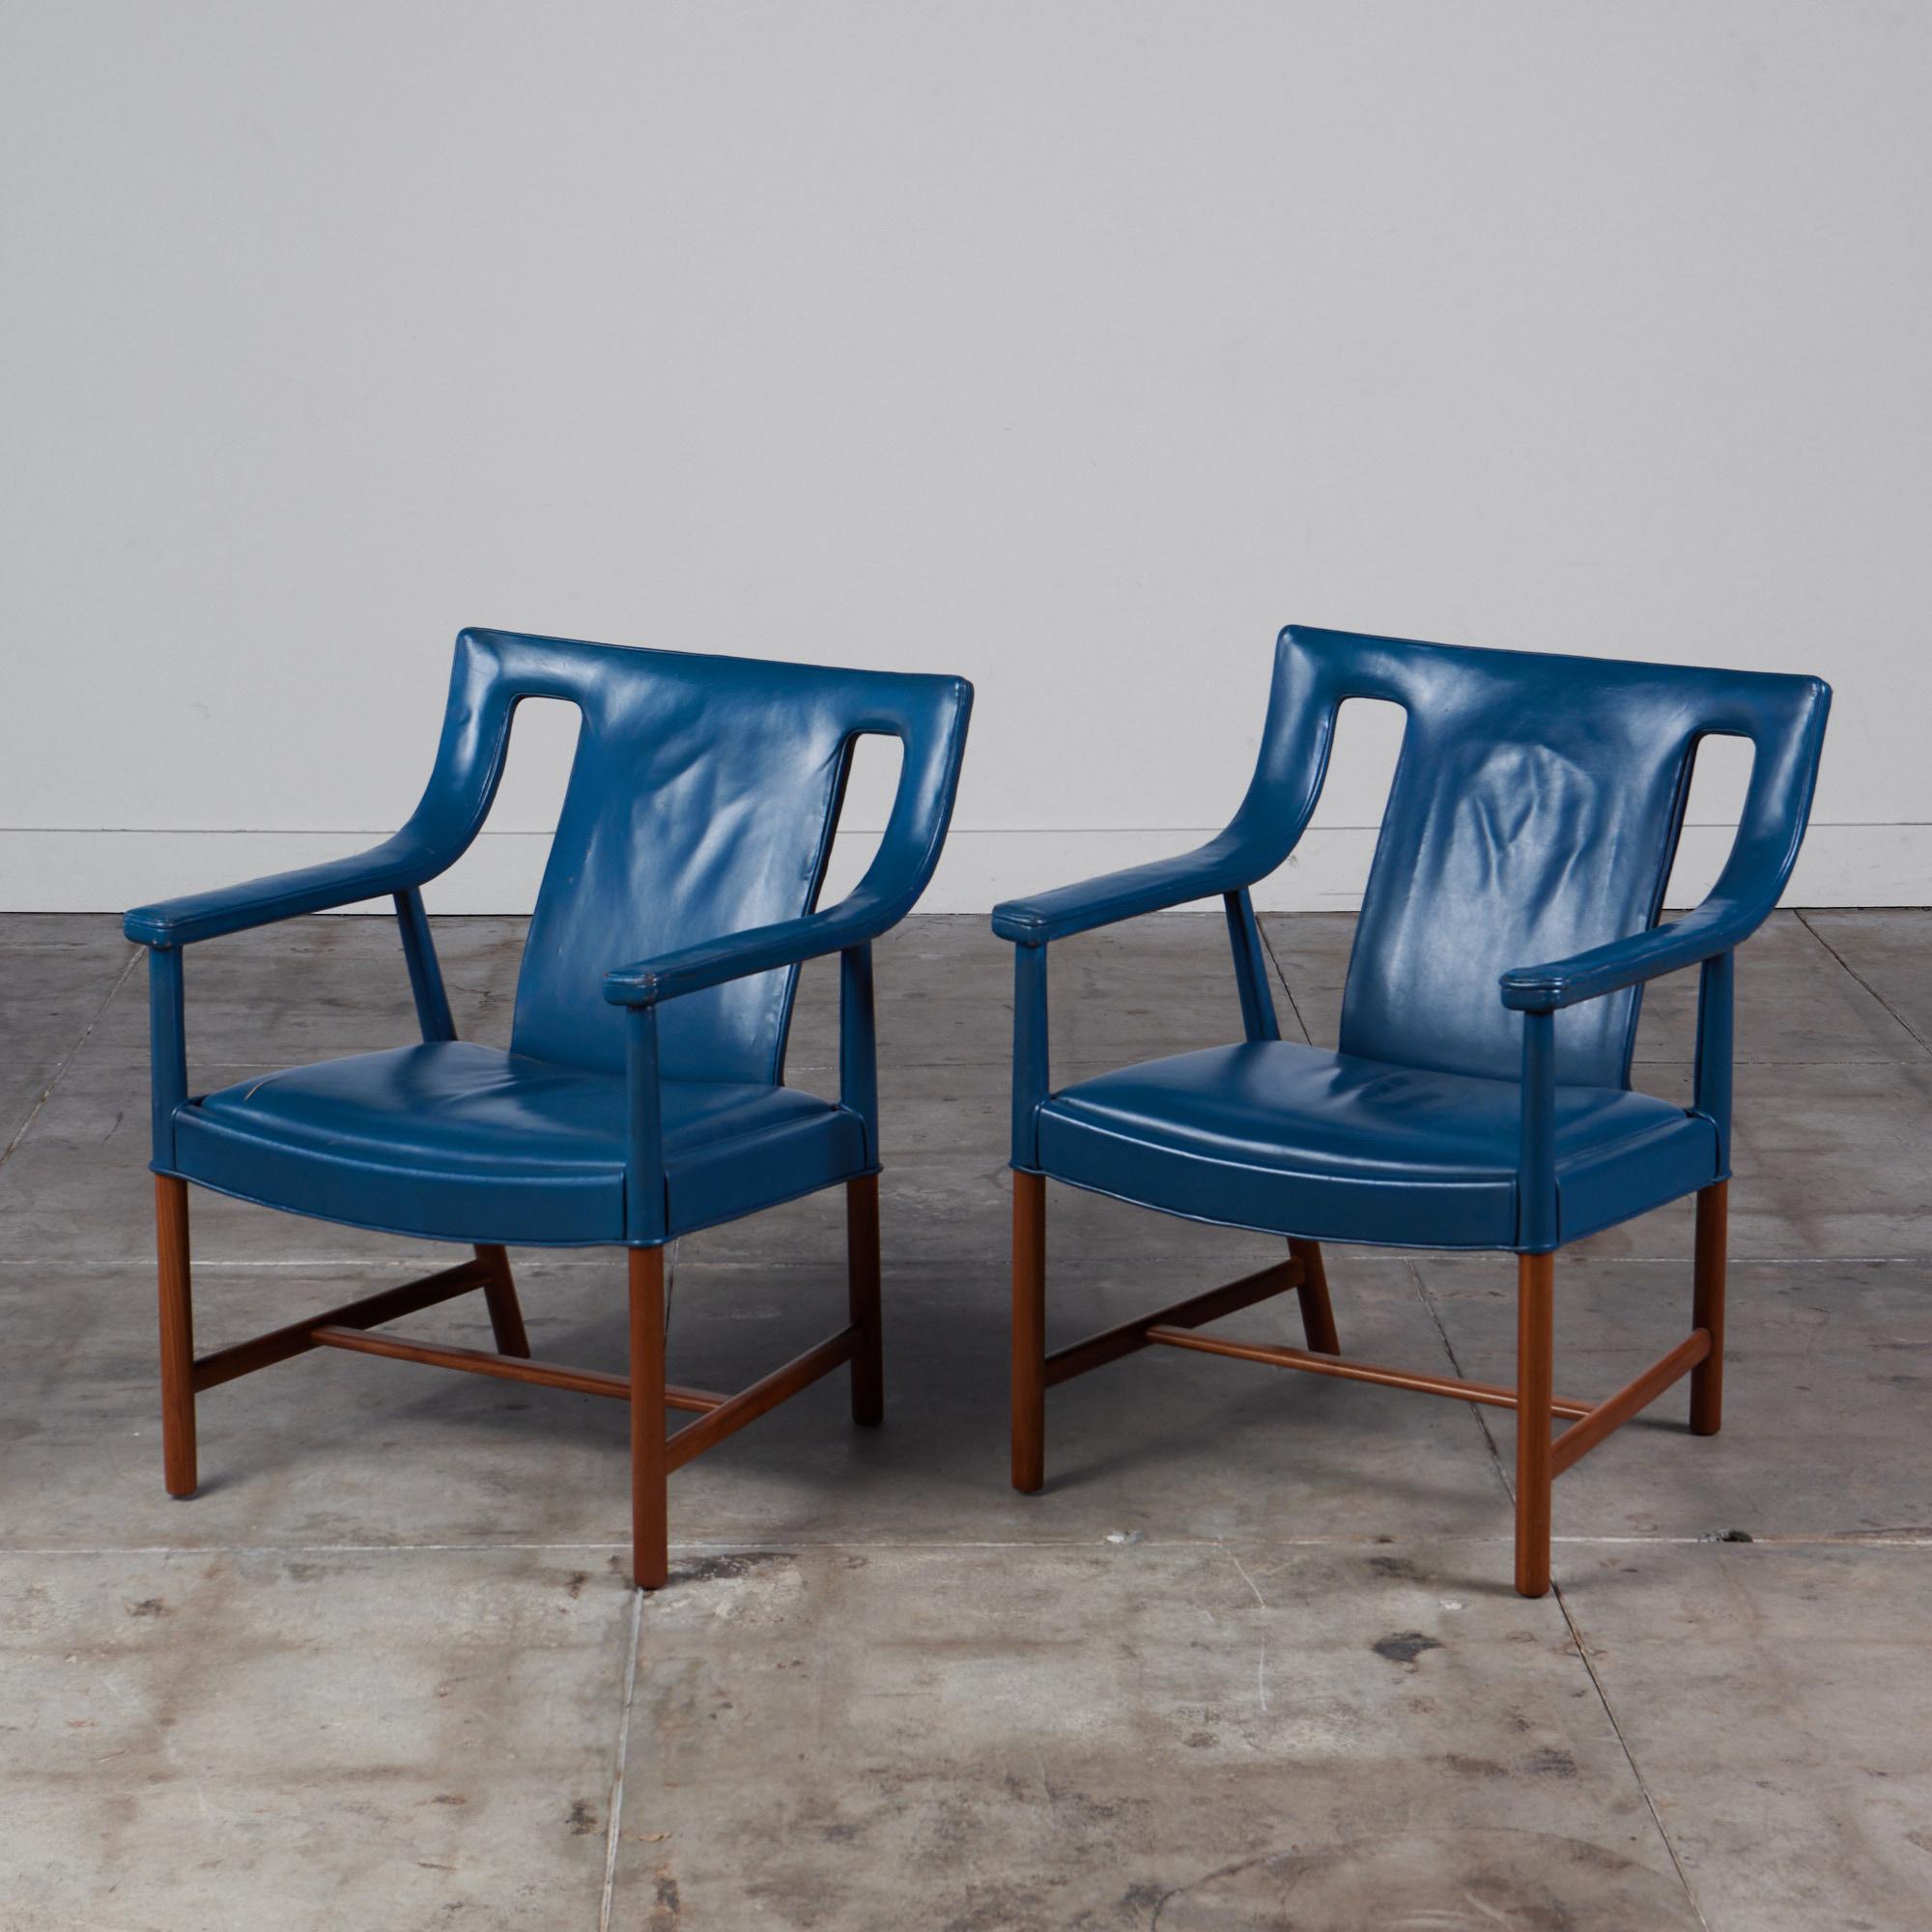 Rare pair of teak and leather chairs by Ejner Larsen and Aksel Bender Madsen, for Ludvig Pontoppidan, c.1940s. These chairs feature the original blue leather. The sculpted armrests and legs are made from teak and leather wrapped. The legs are